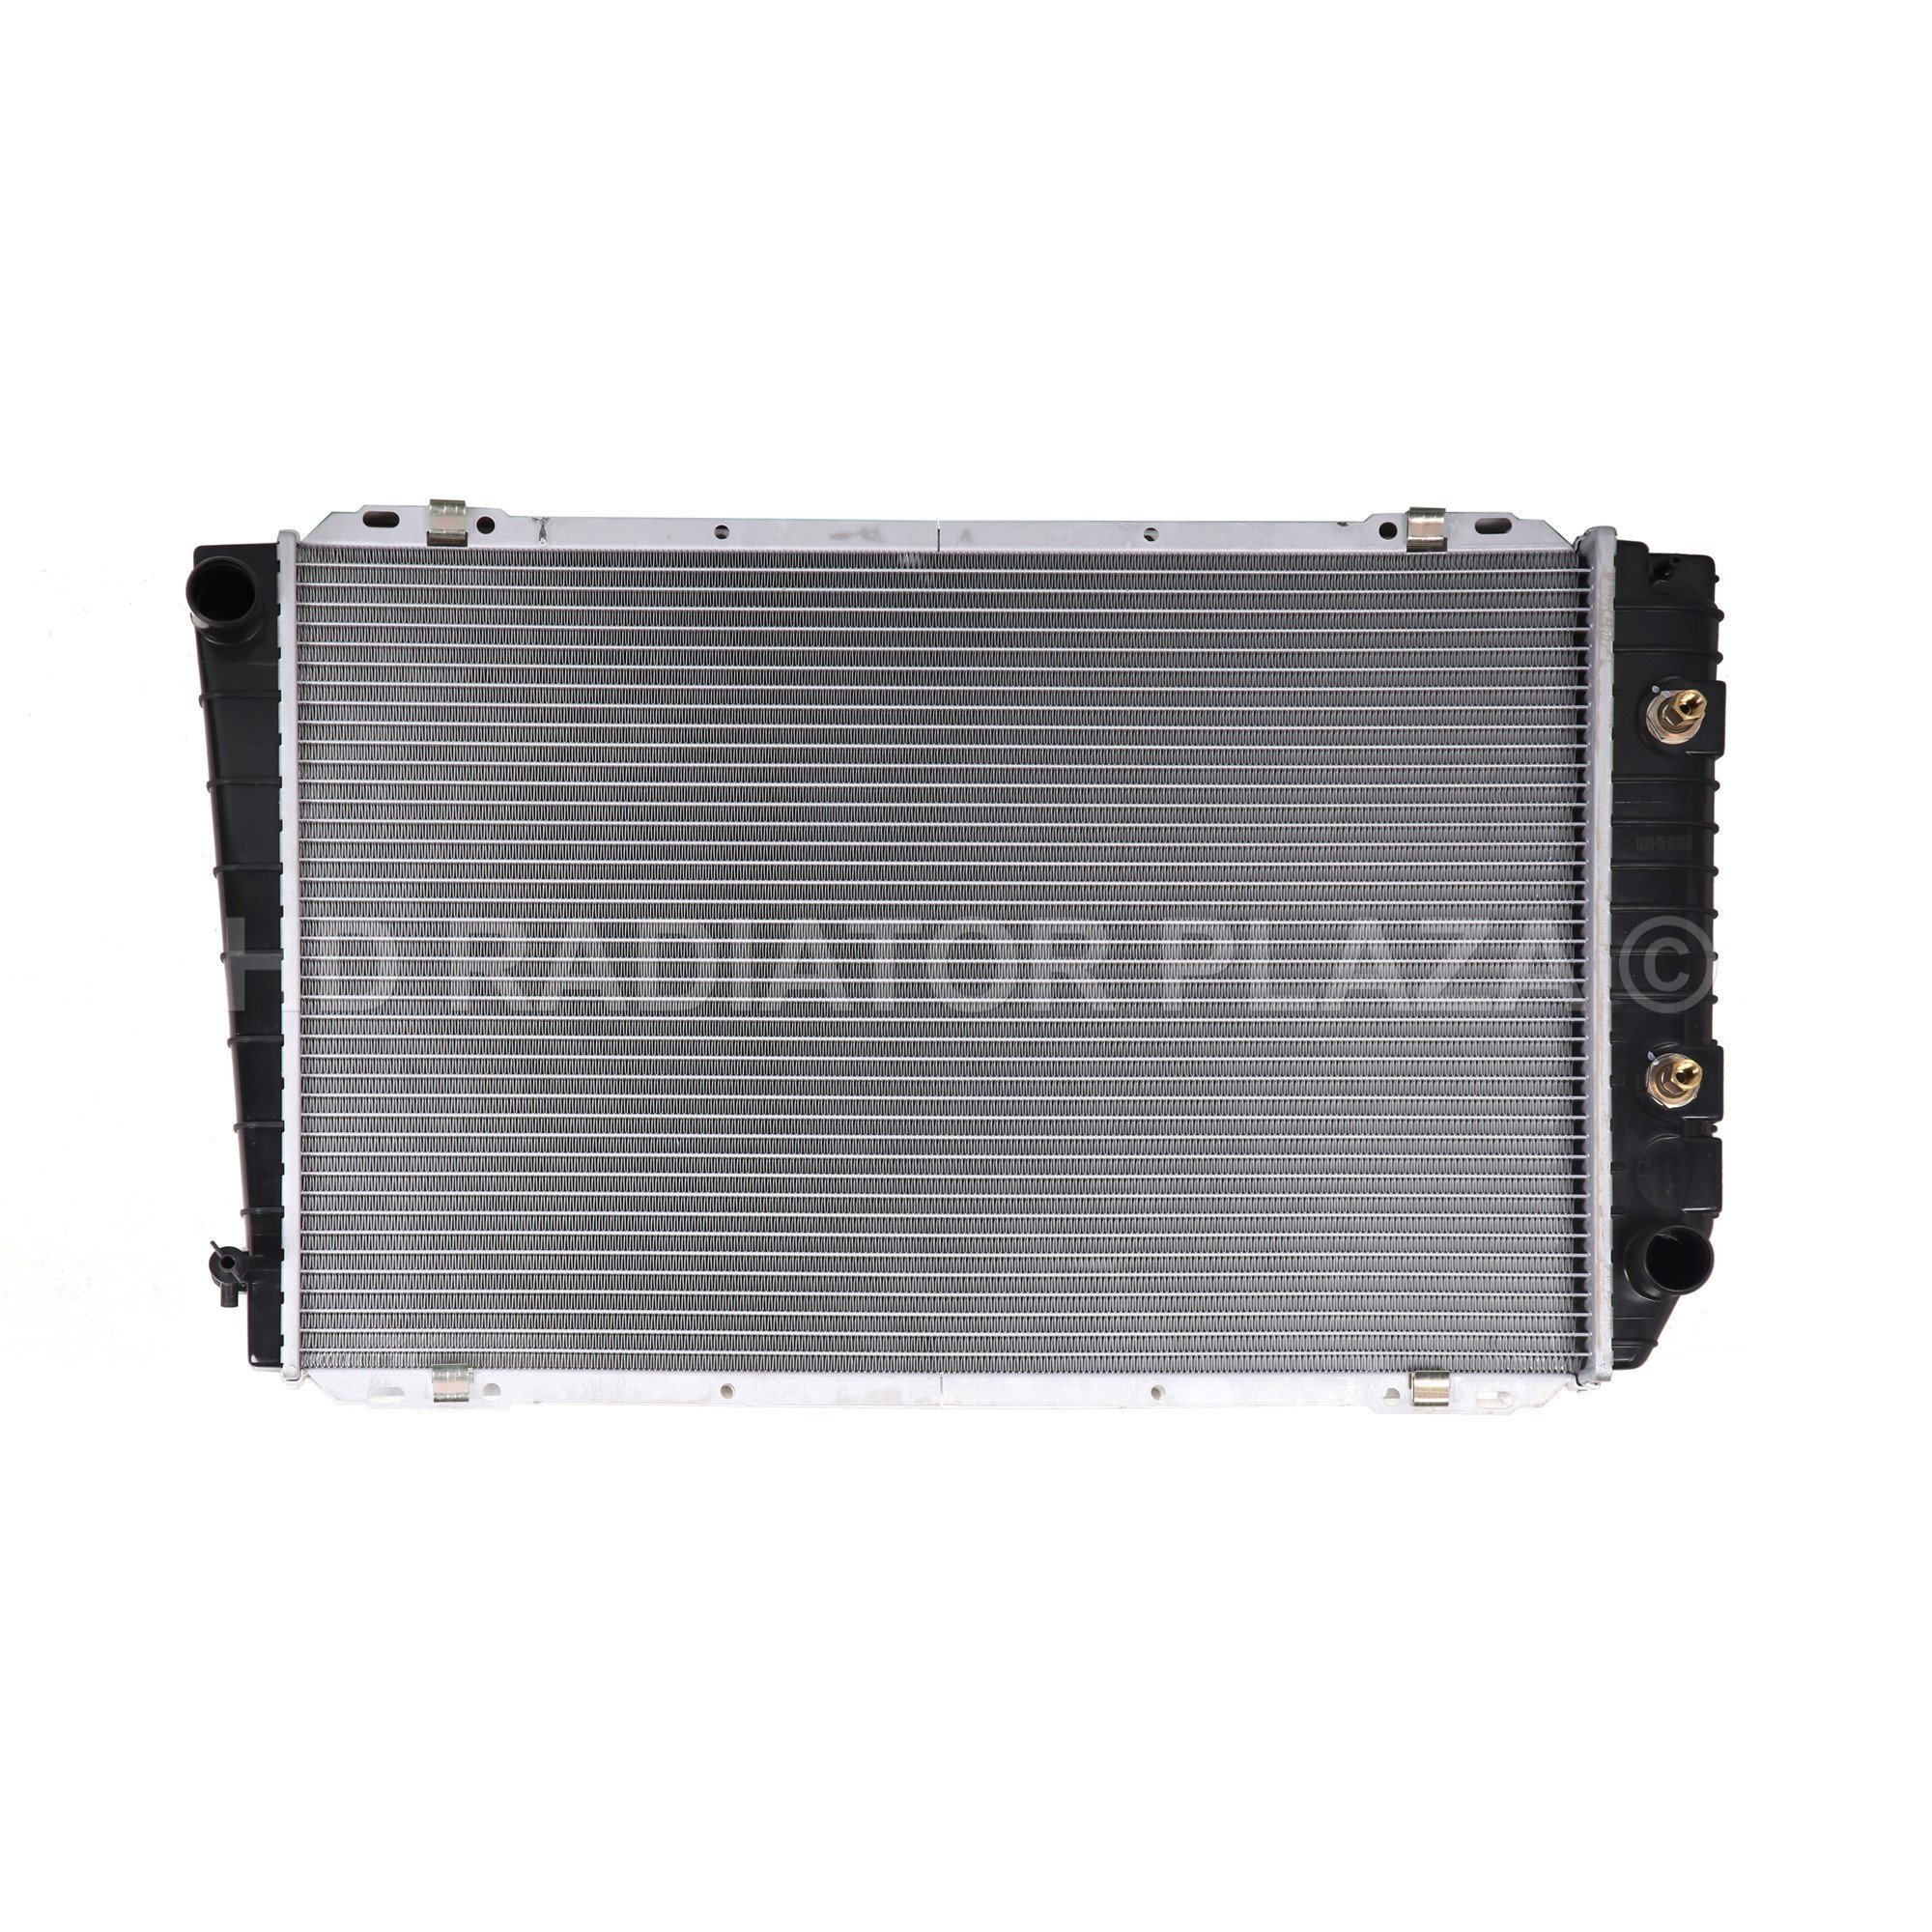 Radiator for 91-94 Ford Crown Victoria, Lincoln Town Car, Grand Marquis